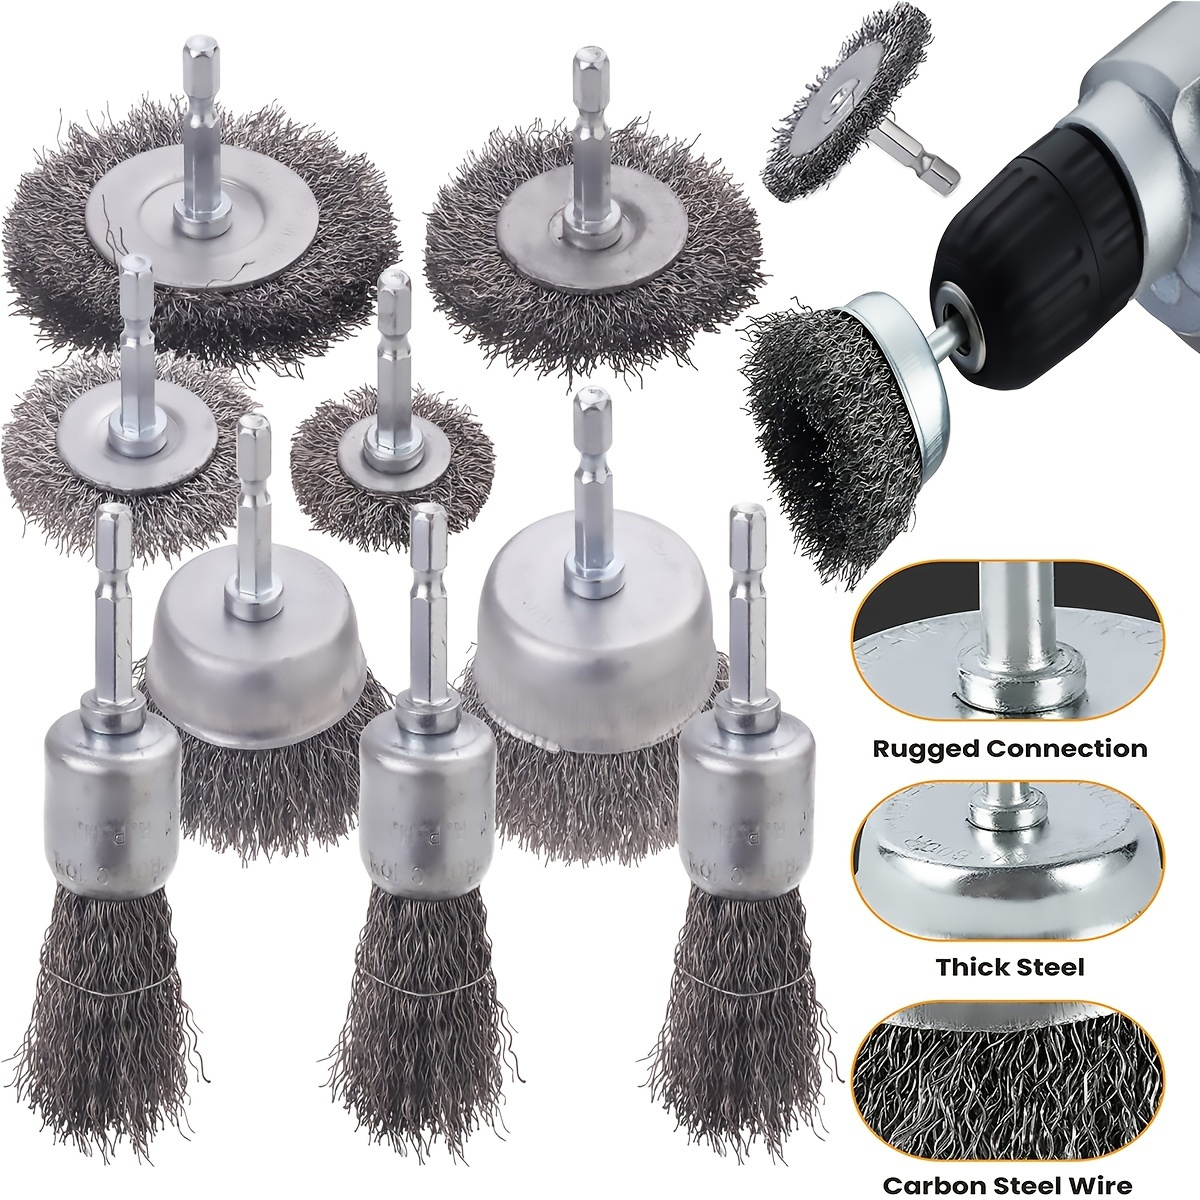 

3pcs/10pcs Wire Brush Wheel Cup Brush Set, Wire Brush For Drill 1/4 Inch Hex Shank 0.012 Inch Coarse Carbon Steel Crimped Wire Wheel For Cleaning Rust, Stripping And Abrasive, For Drill Attachment